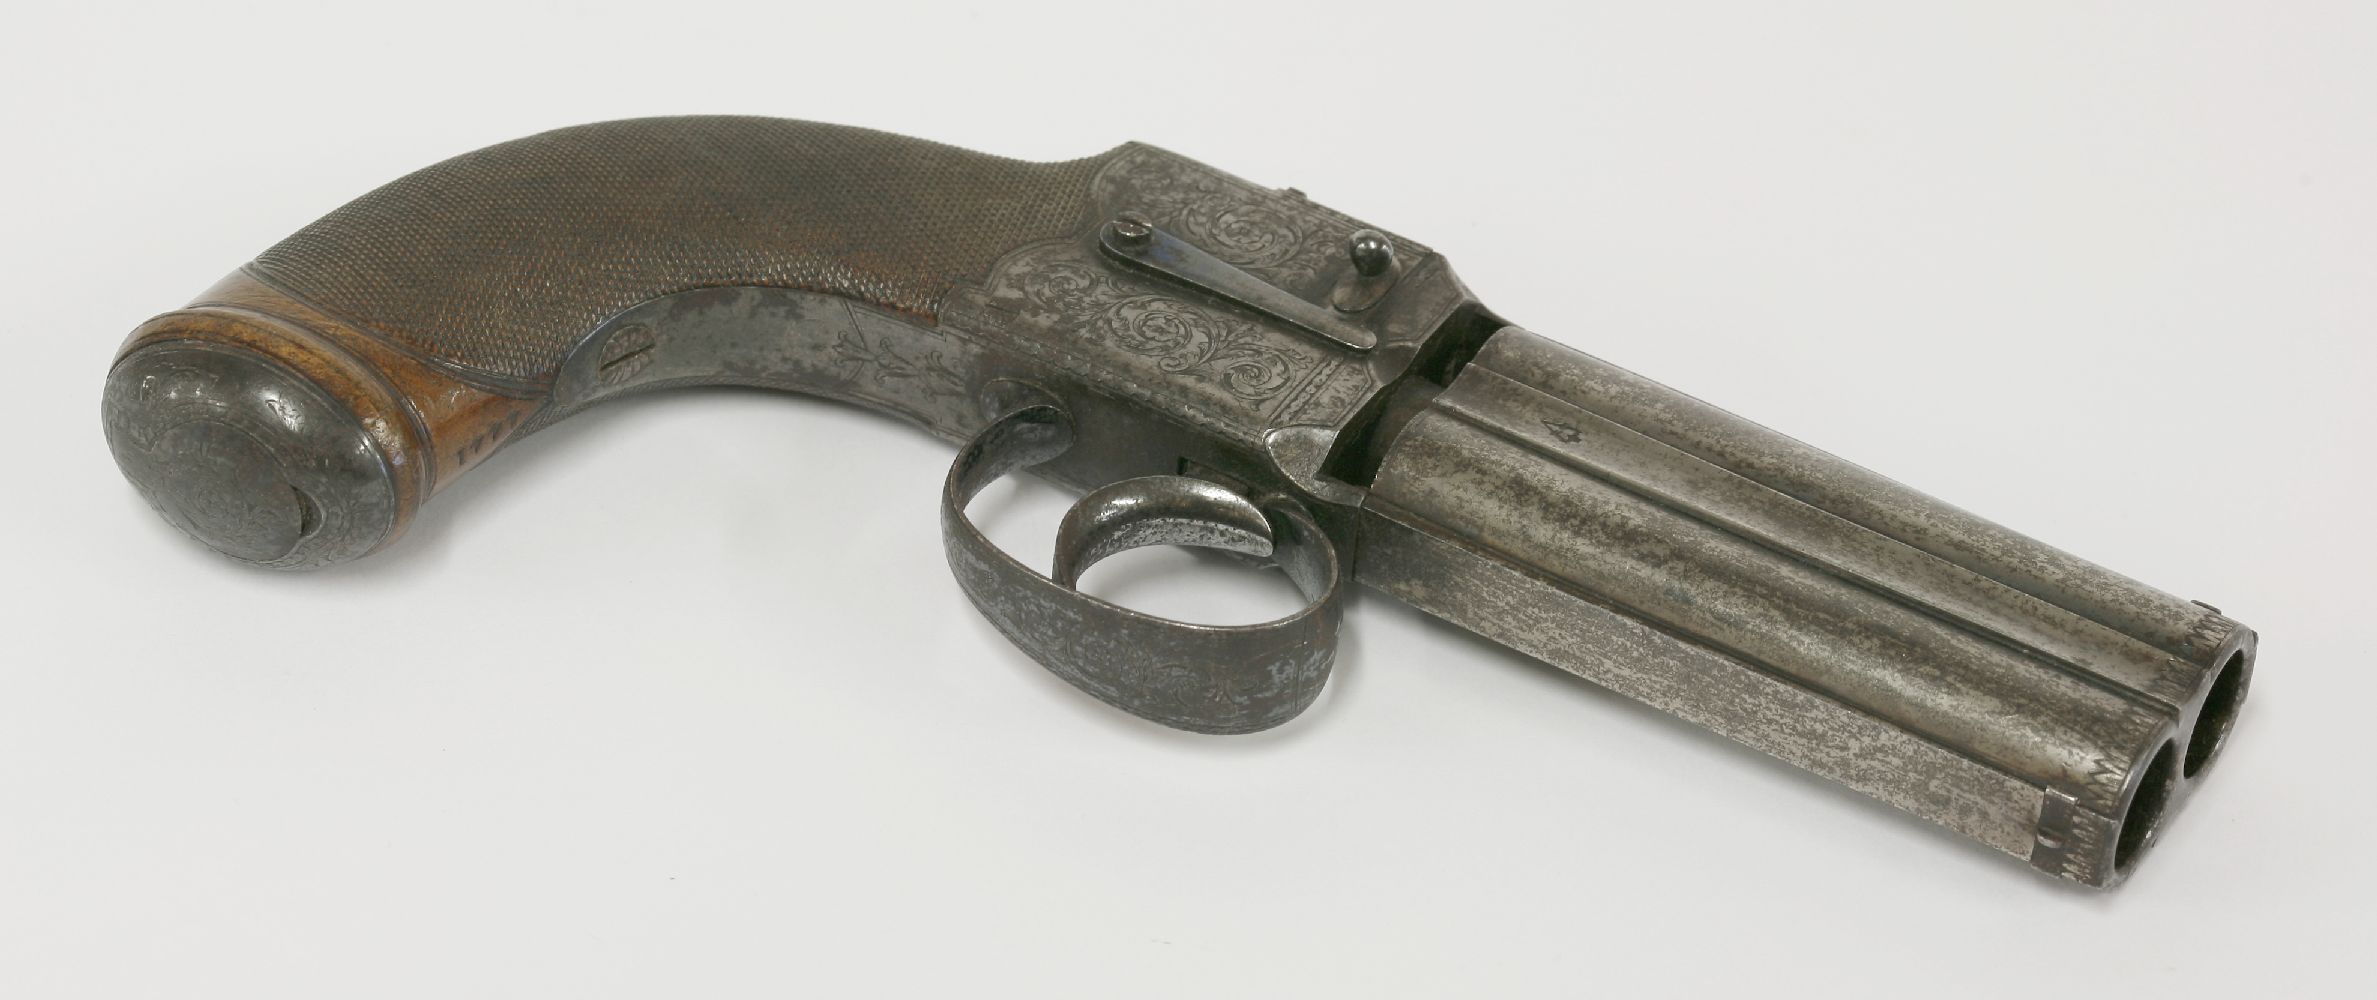 A Reilly's improved turn-over pistol,c.1850, the barrel ends engraved with leaves and with proof - Image 2 of 4